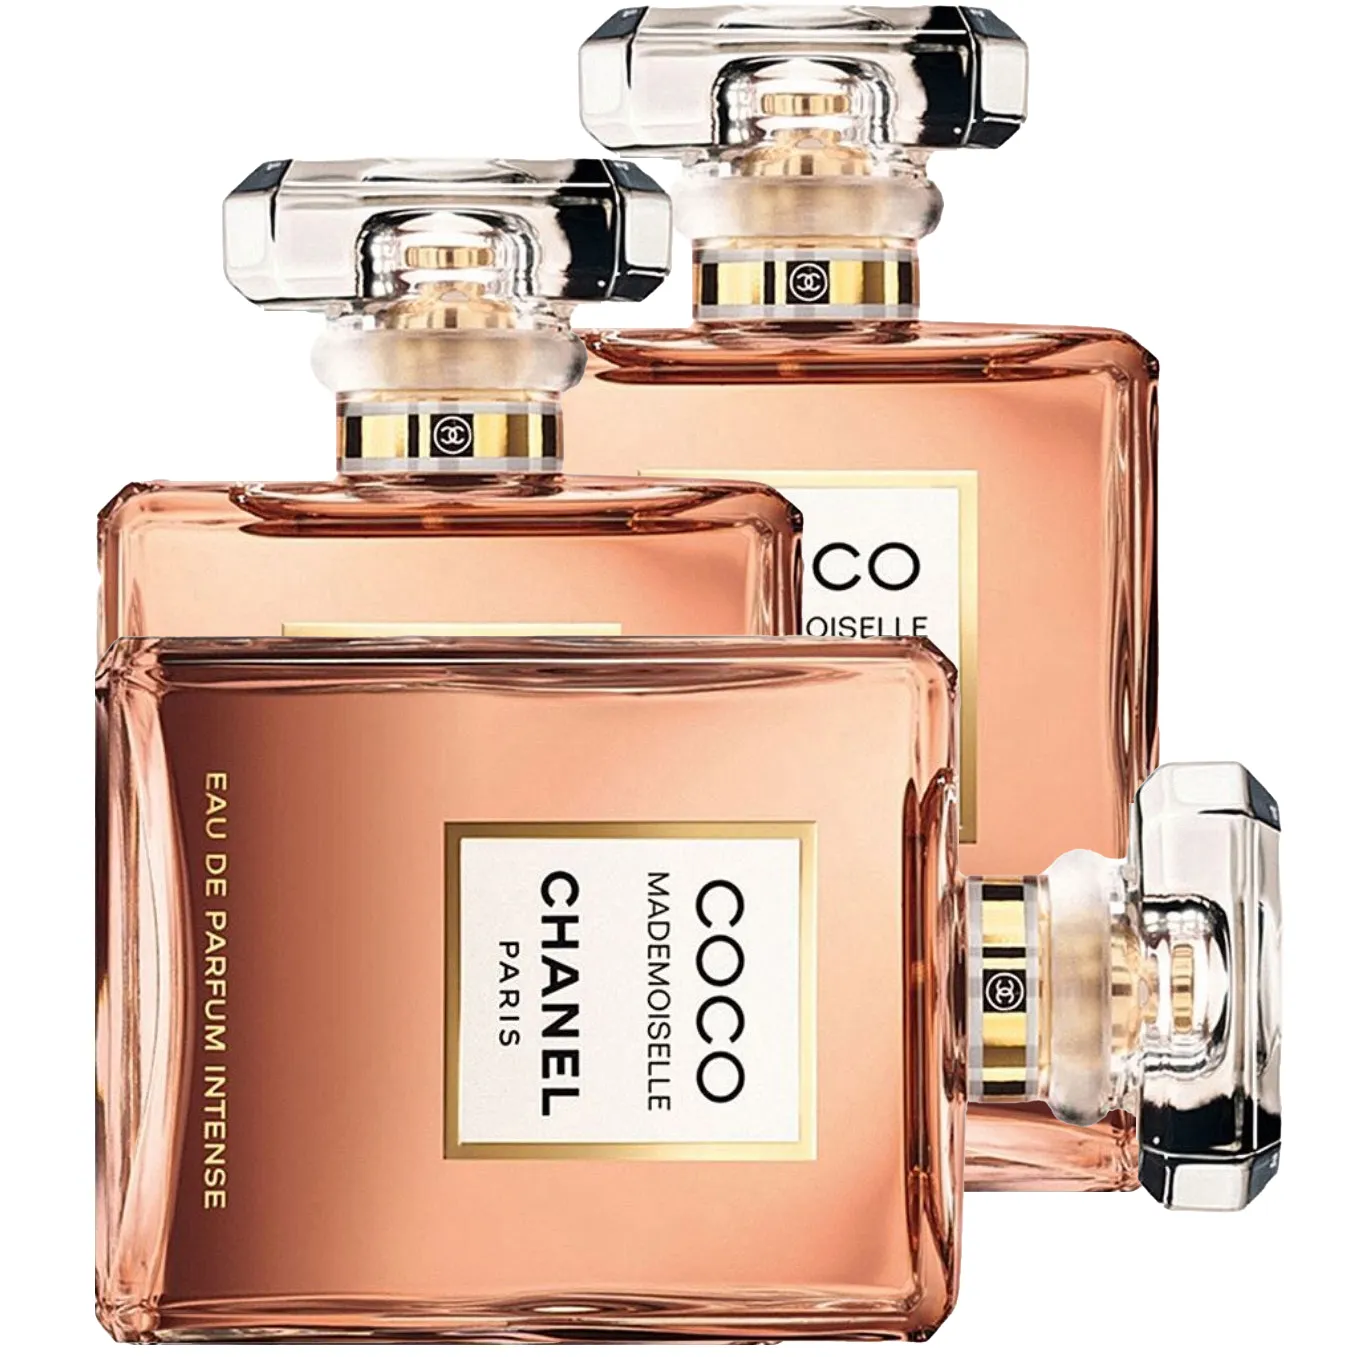 Free Chanel's Coco Mademoiselle Popular Fragrance